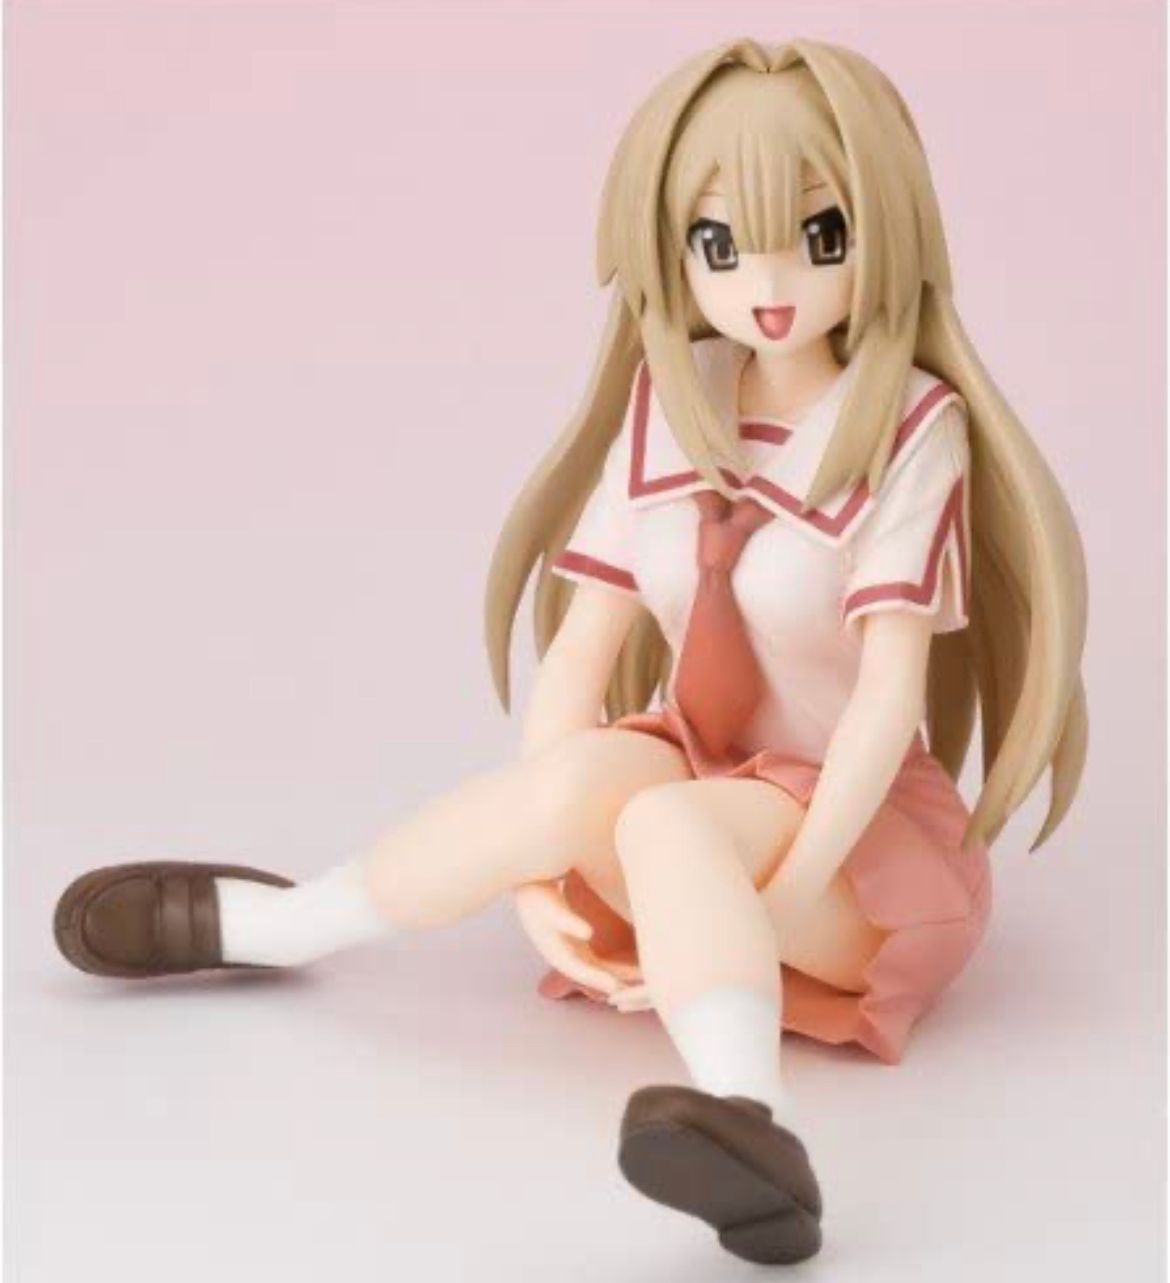 This is an offer made on the Request: Seto no Hanayome - Seto San - 1/7 (Orchid  Seed)